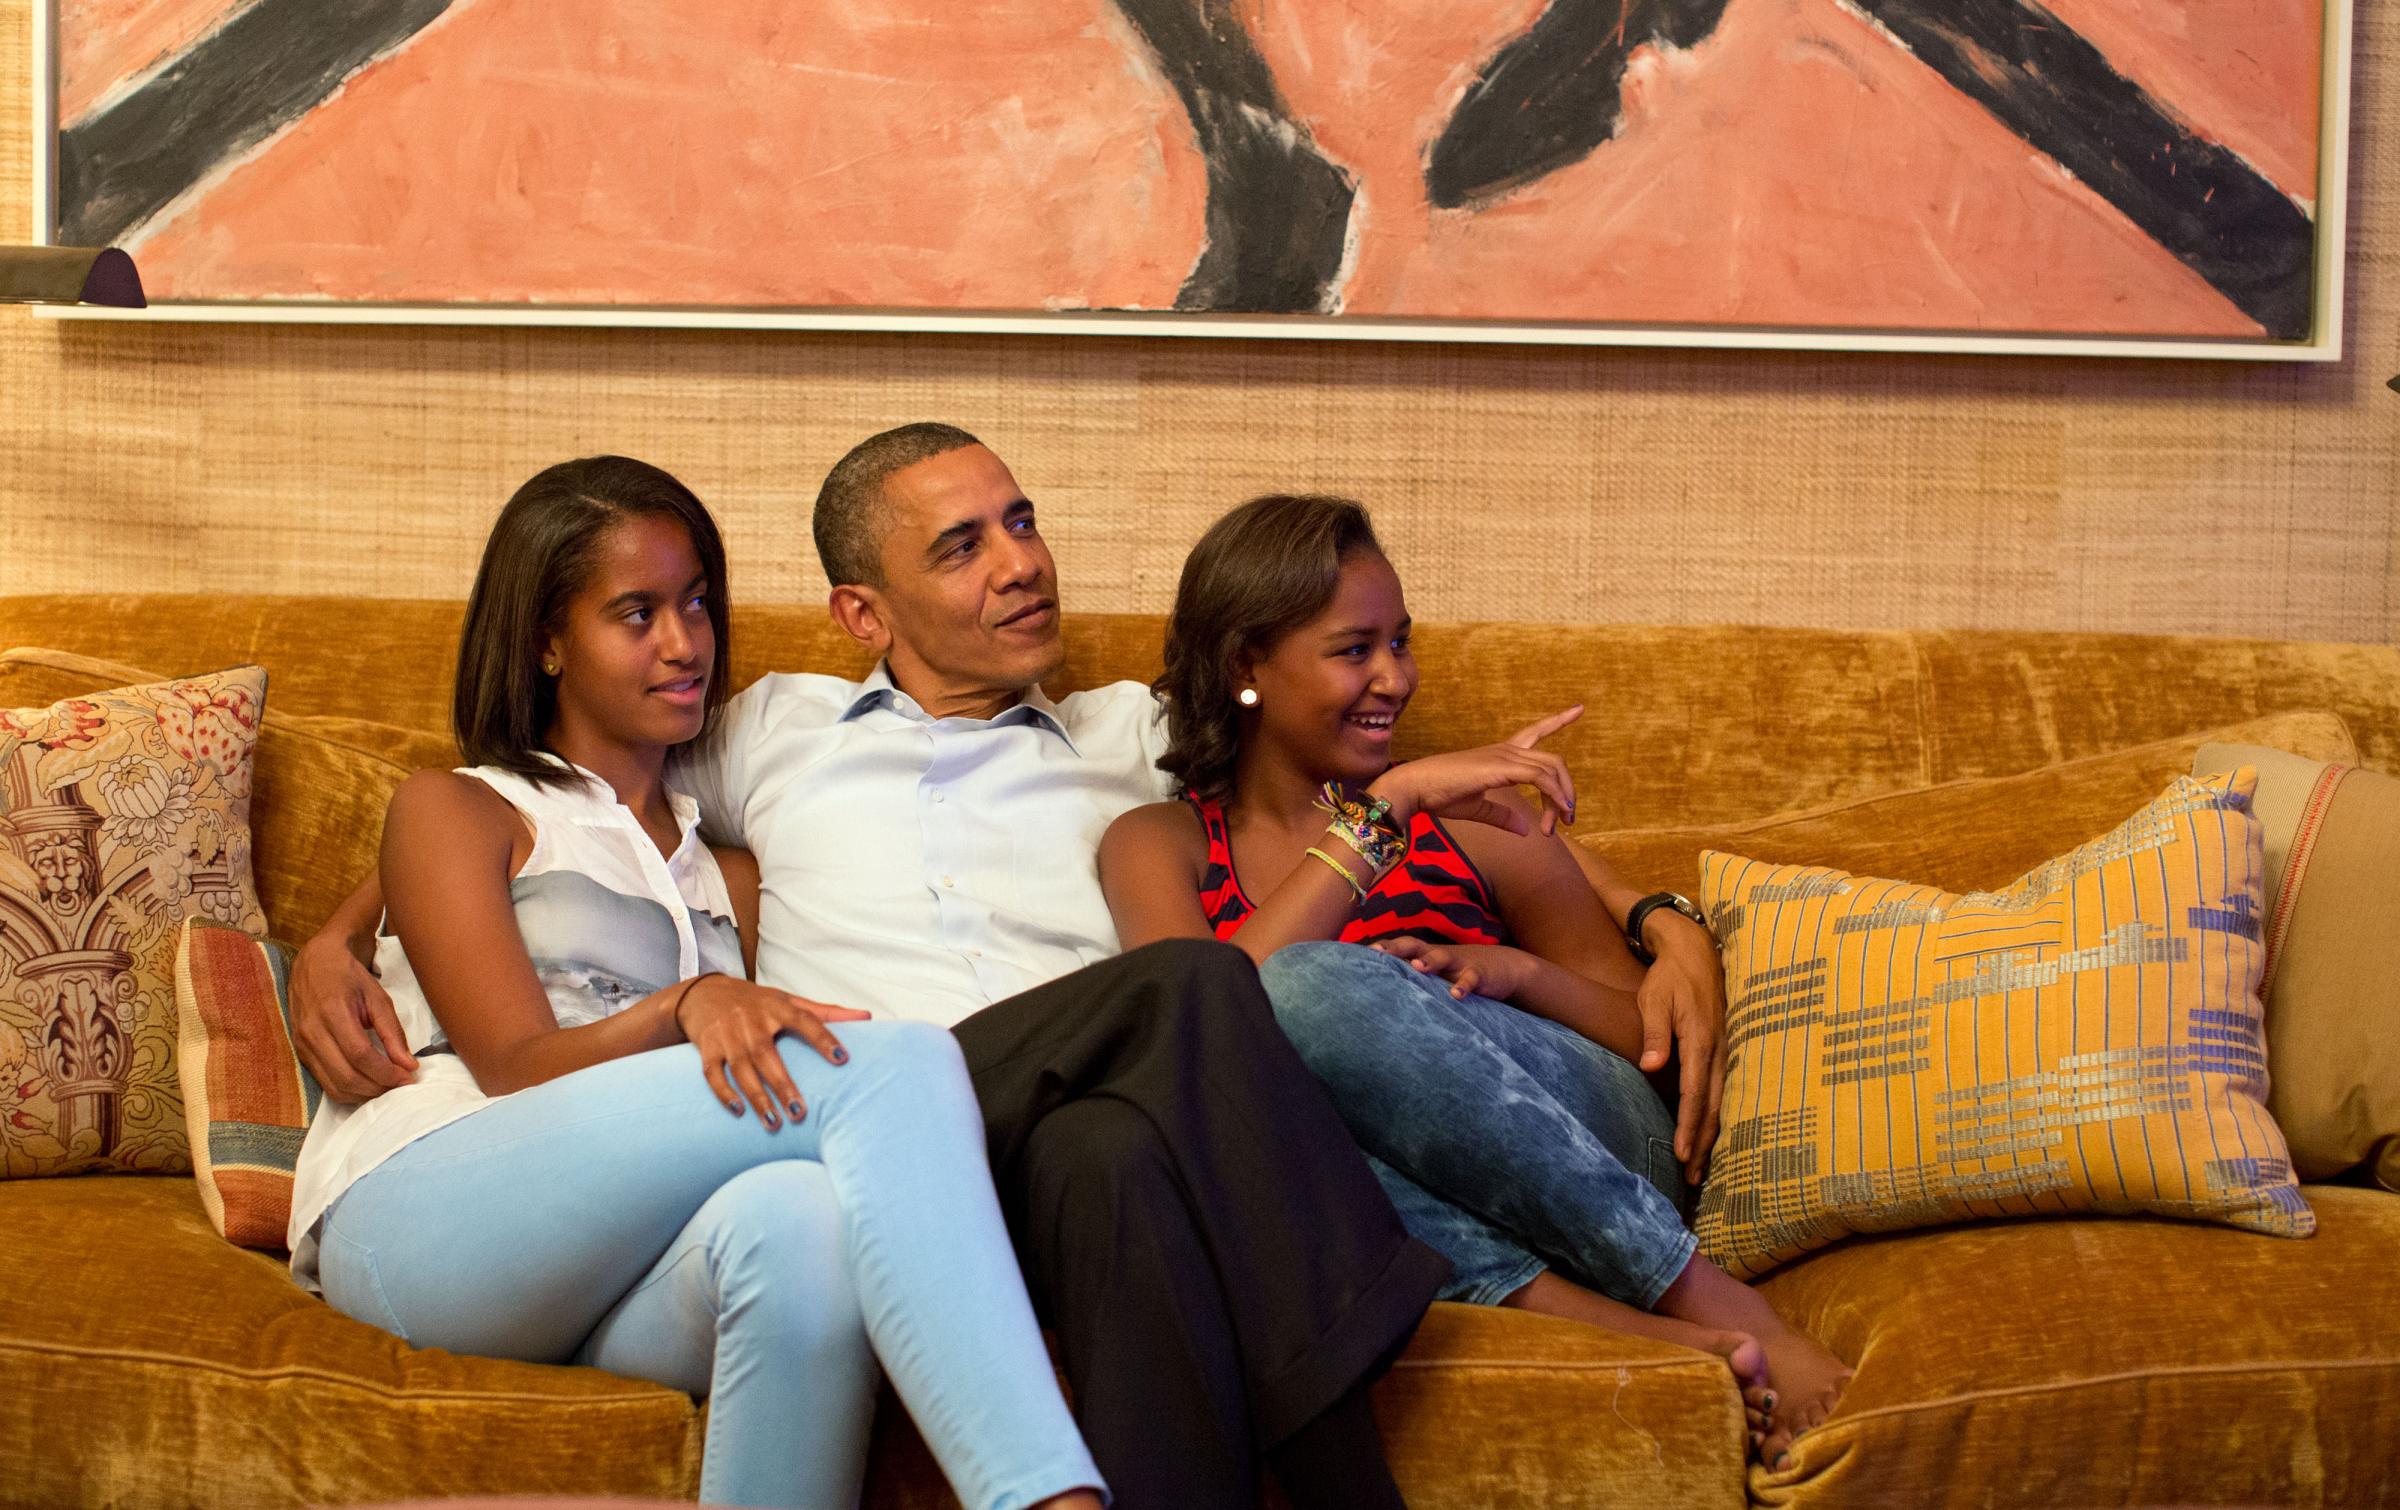 President Barack Obama and his daughters, Malia, left, and Sasha, watch on television as First Lady Michelle Obama takes the stage to deliver her speech at the Democratic National Convention, in the Treaty Room of the White House, Tuesday night, Sept. 4, 2012. (Official White House Photo by Pete Souza)